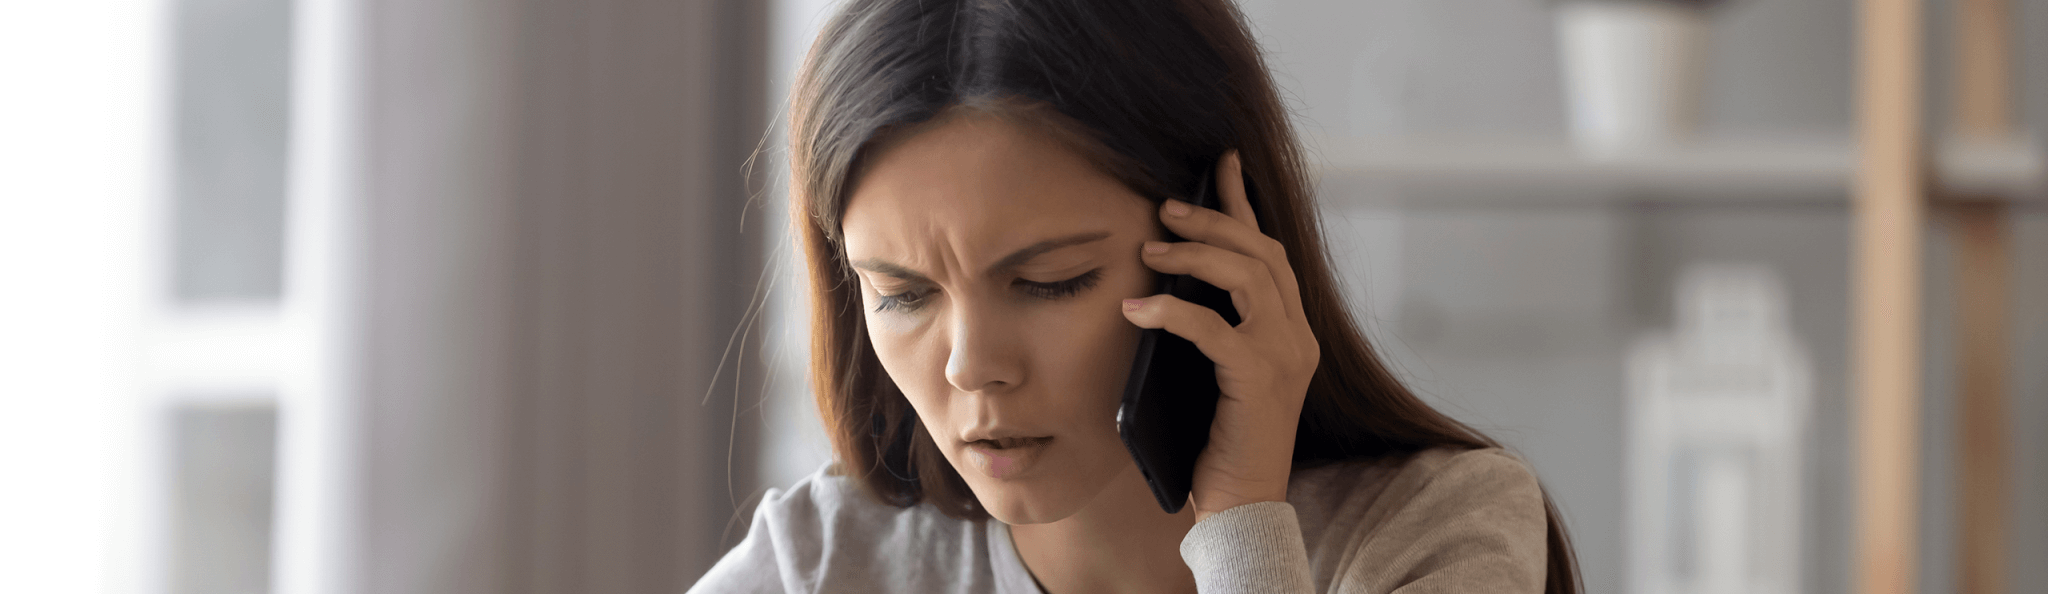 A How-to Guide to Reduce Abandoned Calls in Your Call Center Through Texting